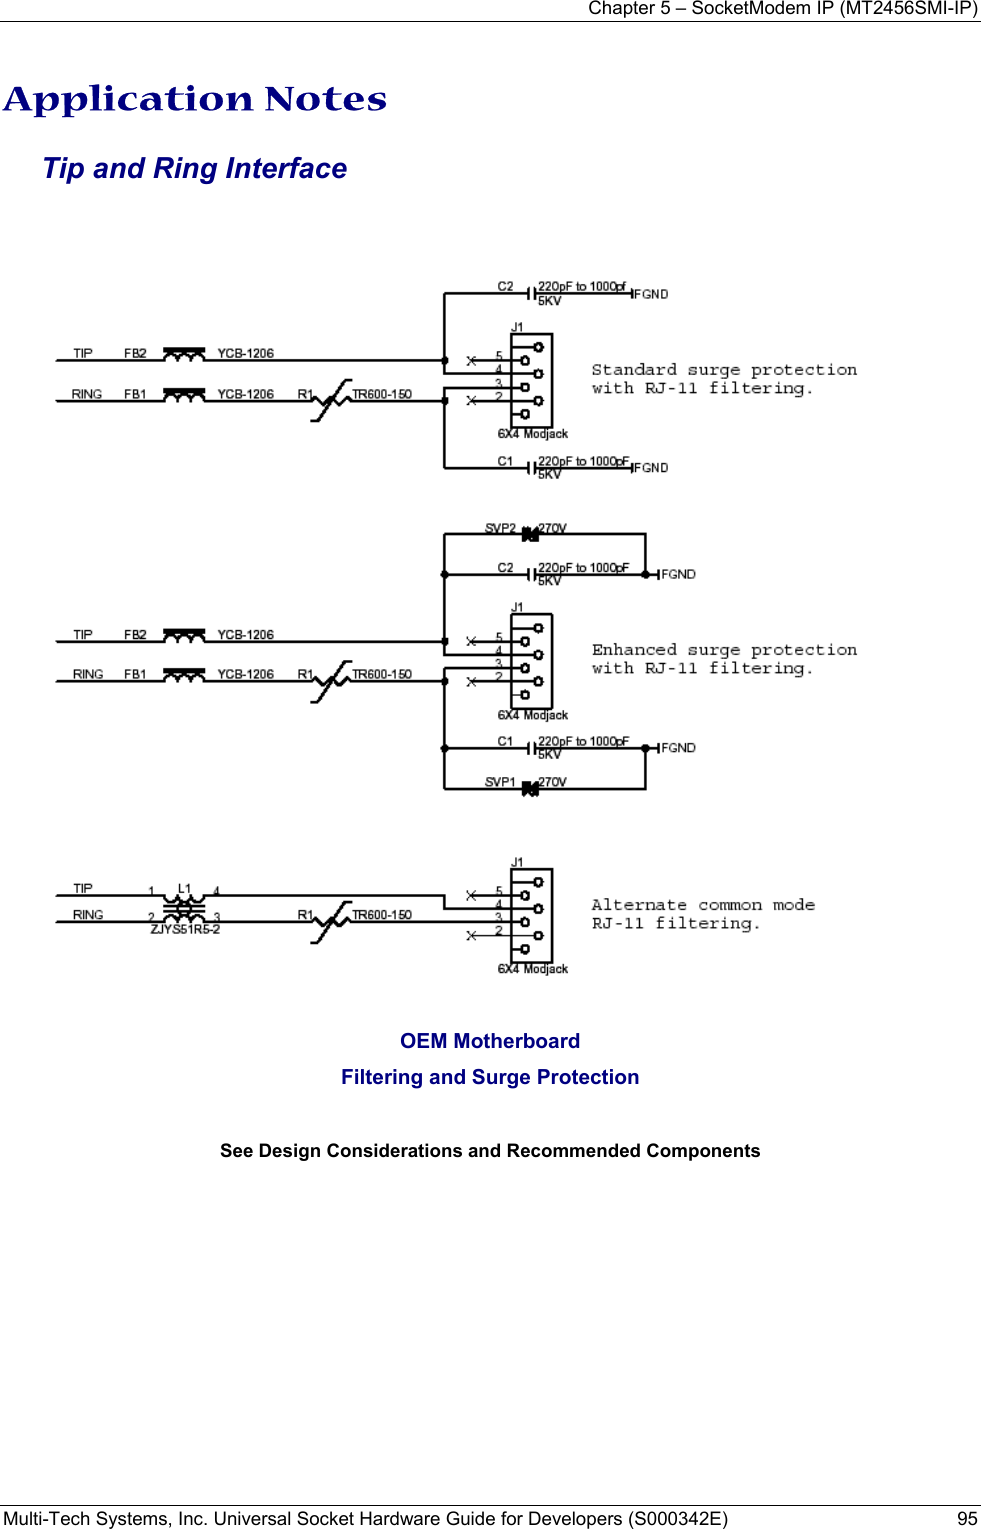 Chapter 5 – SocketModem IP (MT2456SMI-IP) Multi-Tech Systems, Inc. Universal Socket Hardware Guide for Developers (S000342E)  95  Application Notes  Tip and Ring Interface     OEM Motherboard Filtering and Surge Protection  See Design Considerations and Recommended Components 